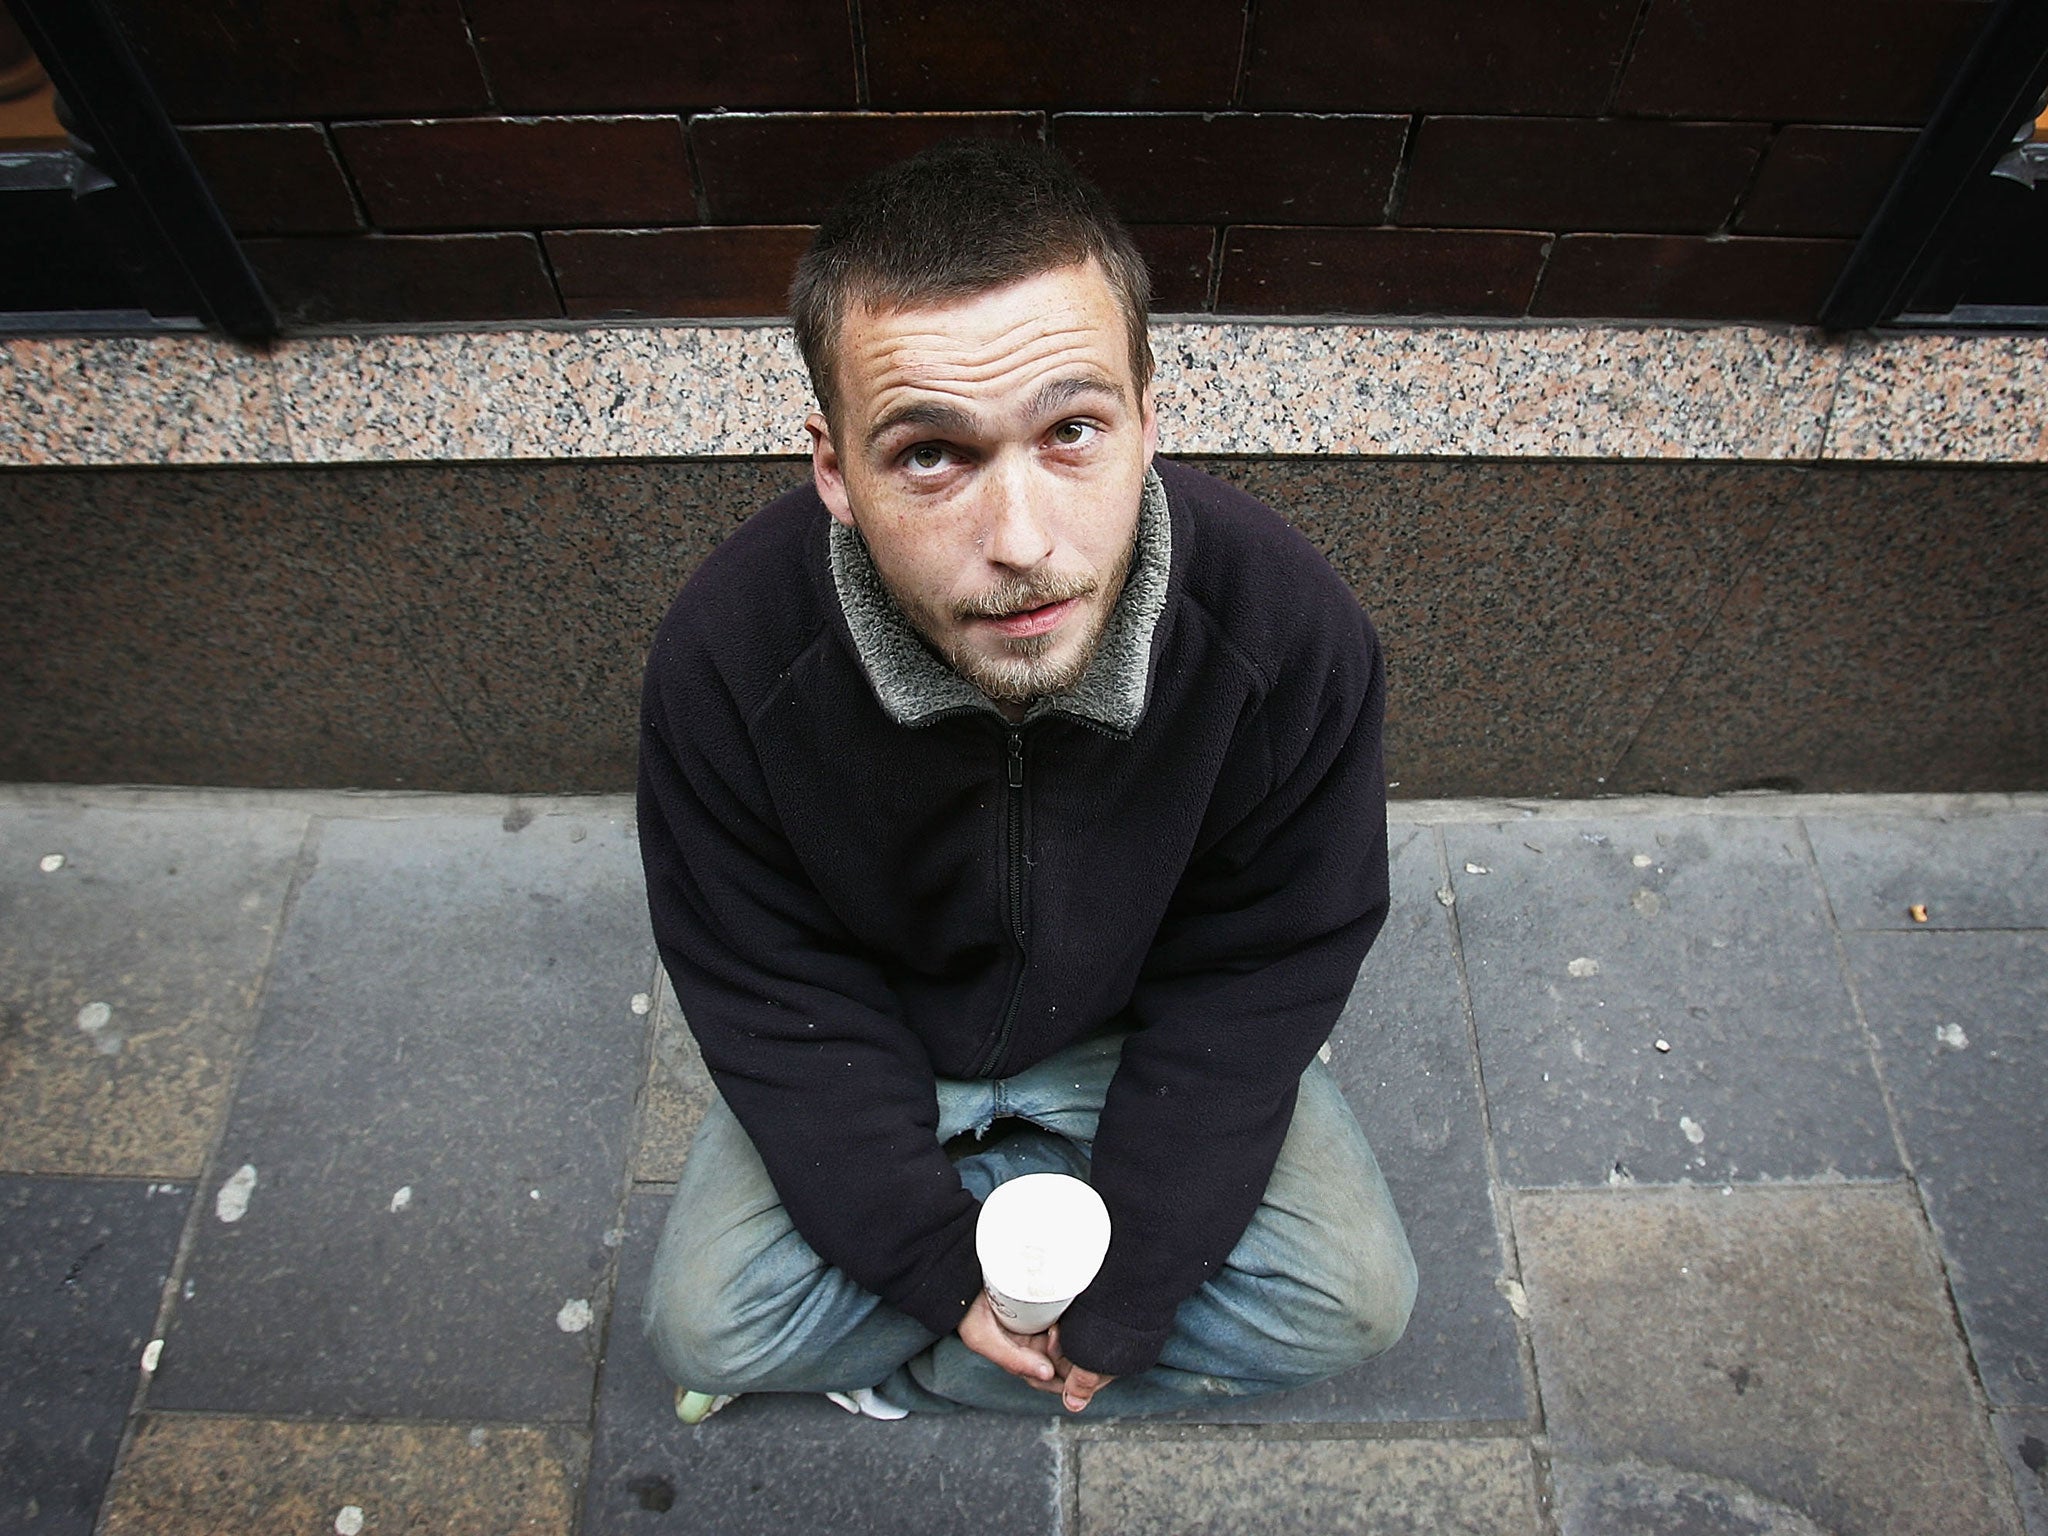 Since 2010, homelessness has gone up by just under a third